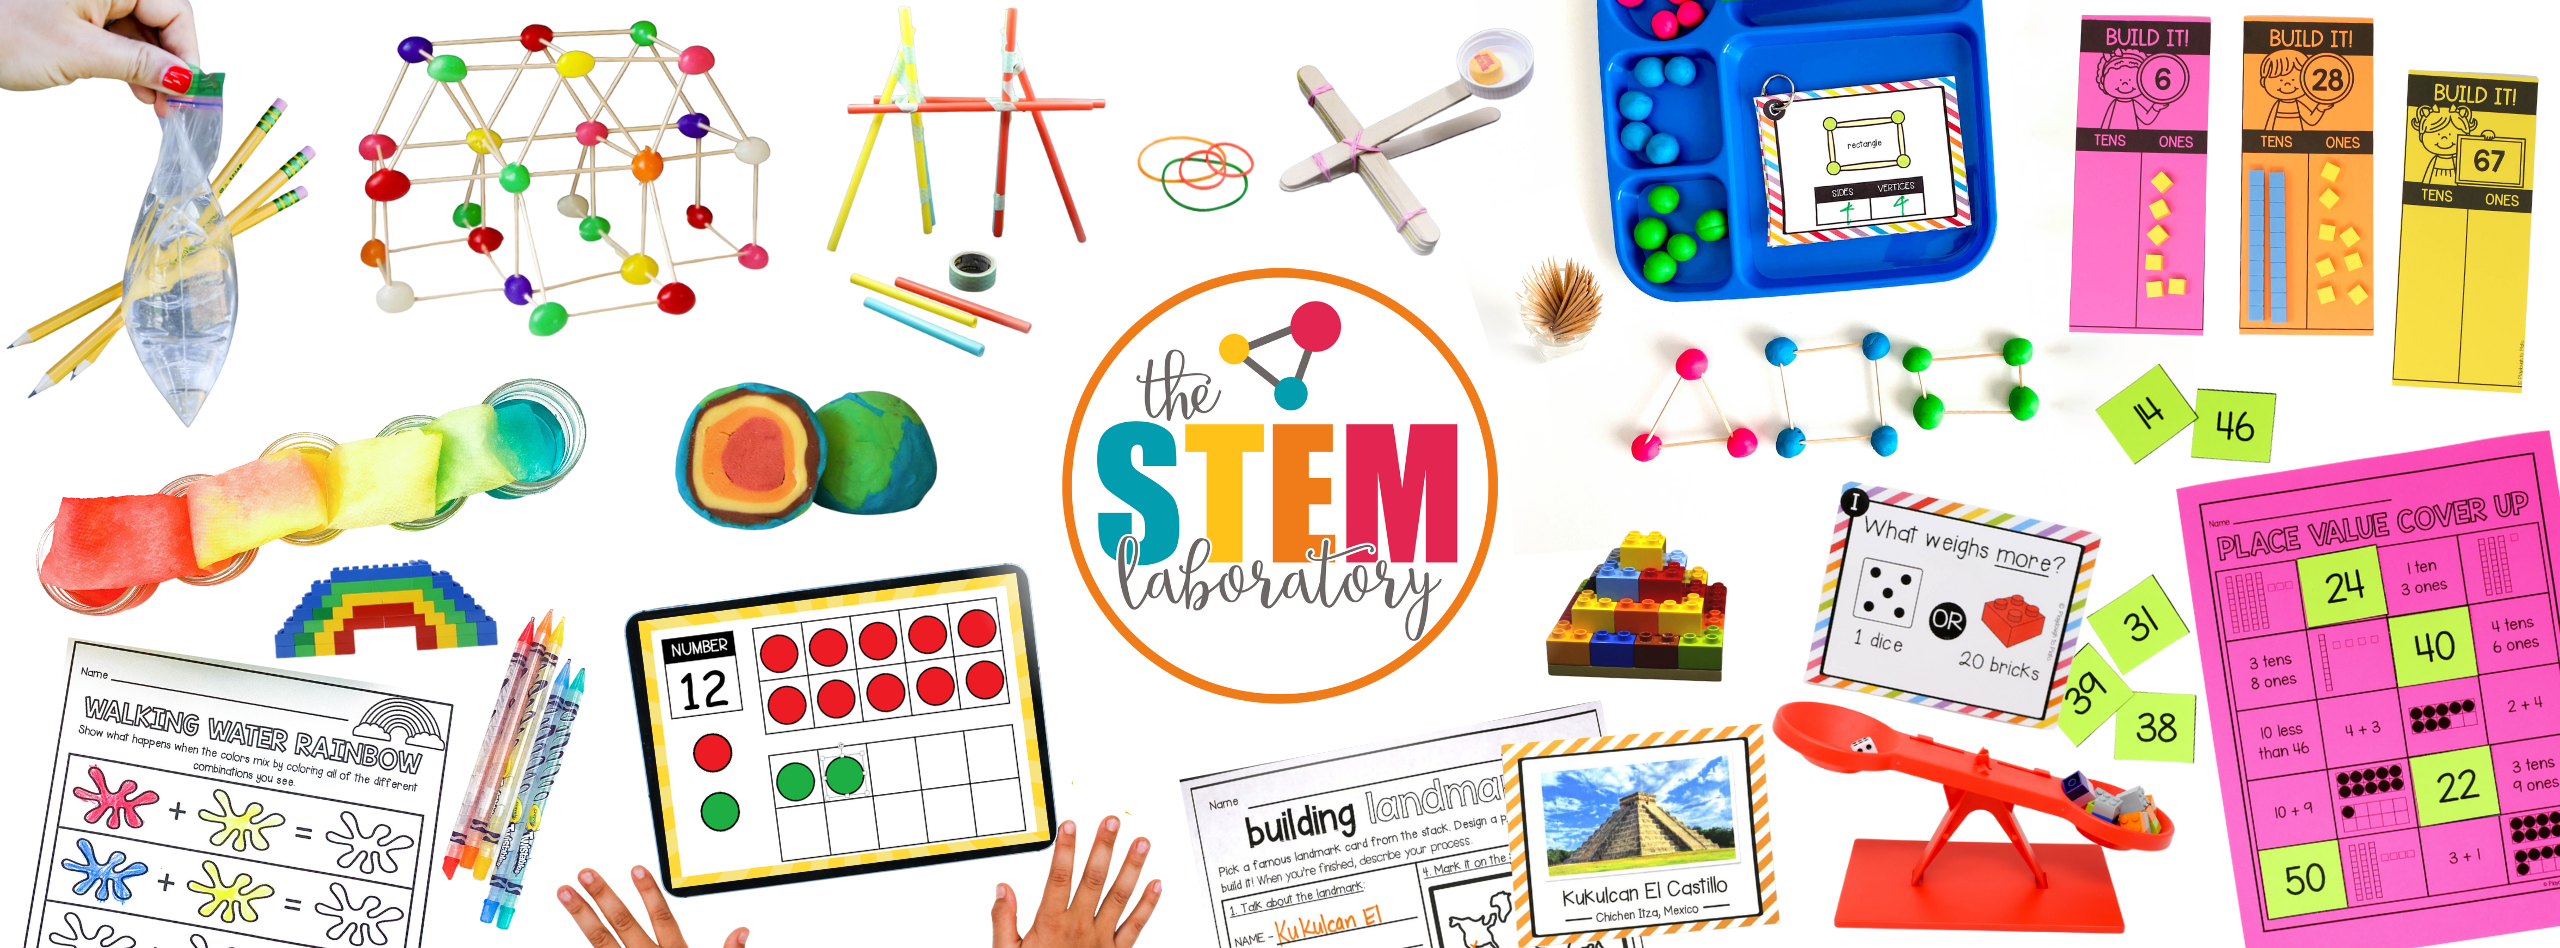 What are Some Great Middle School STEM Projects for Kids?